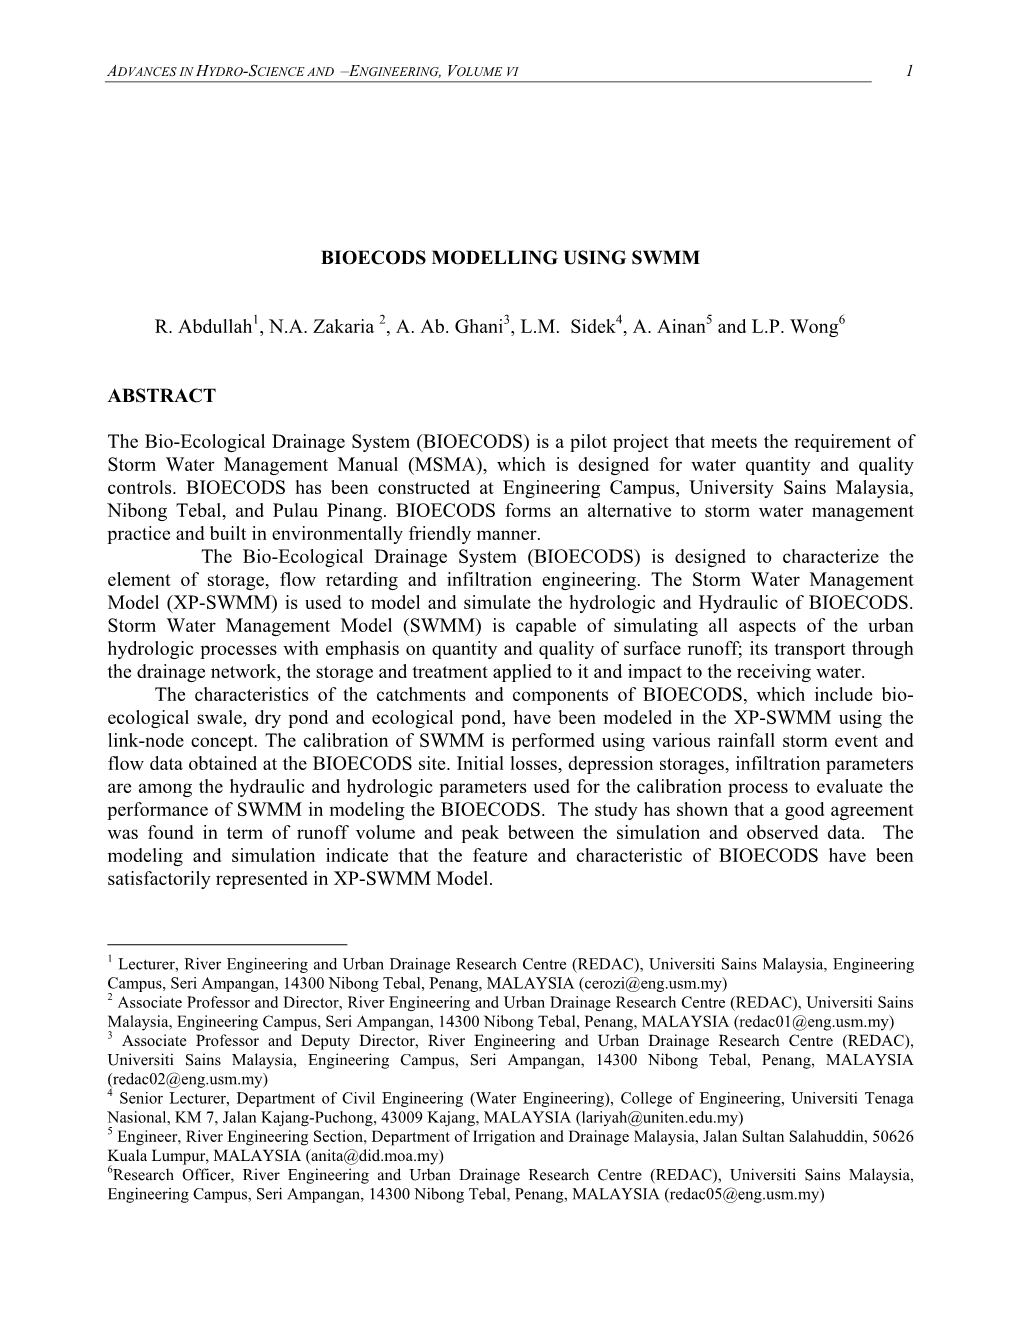 BIOECODS MODELLING USING SWMM R. Abdullah1, N.A. Zakaria 2, A. Ab. Ghani3, L.M. Sidek4, A. Ainan5 and L.P. Wong6 ABSTRACT the B